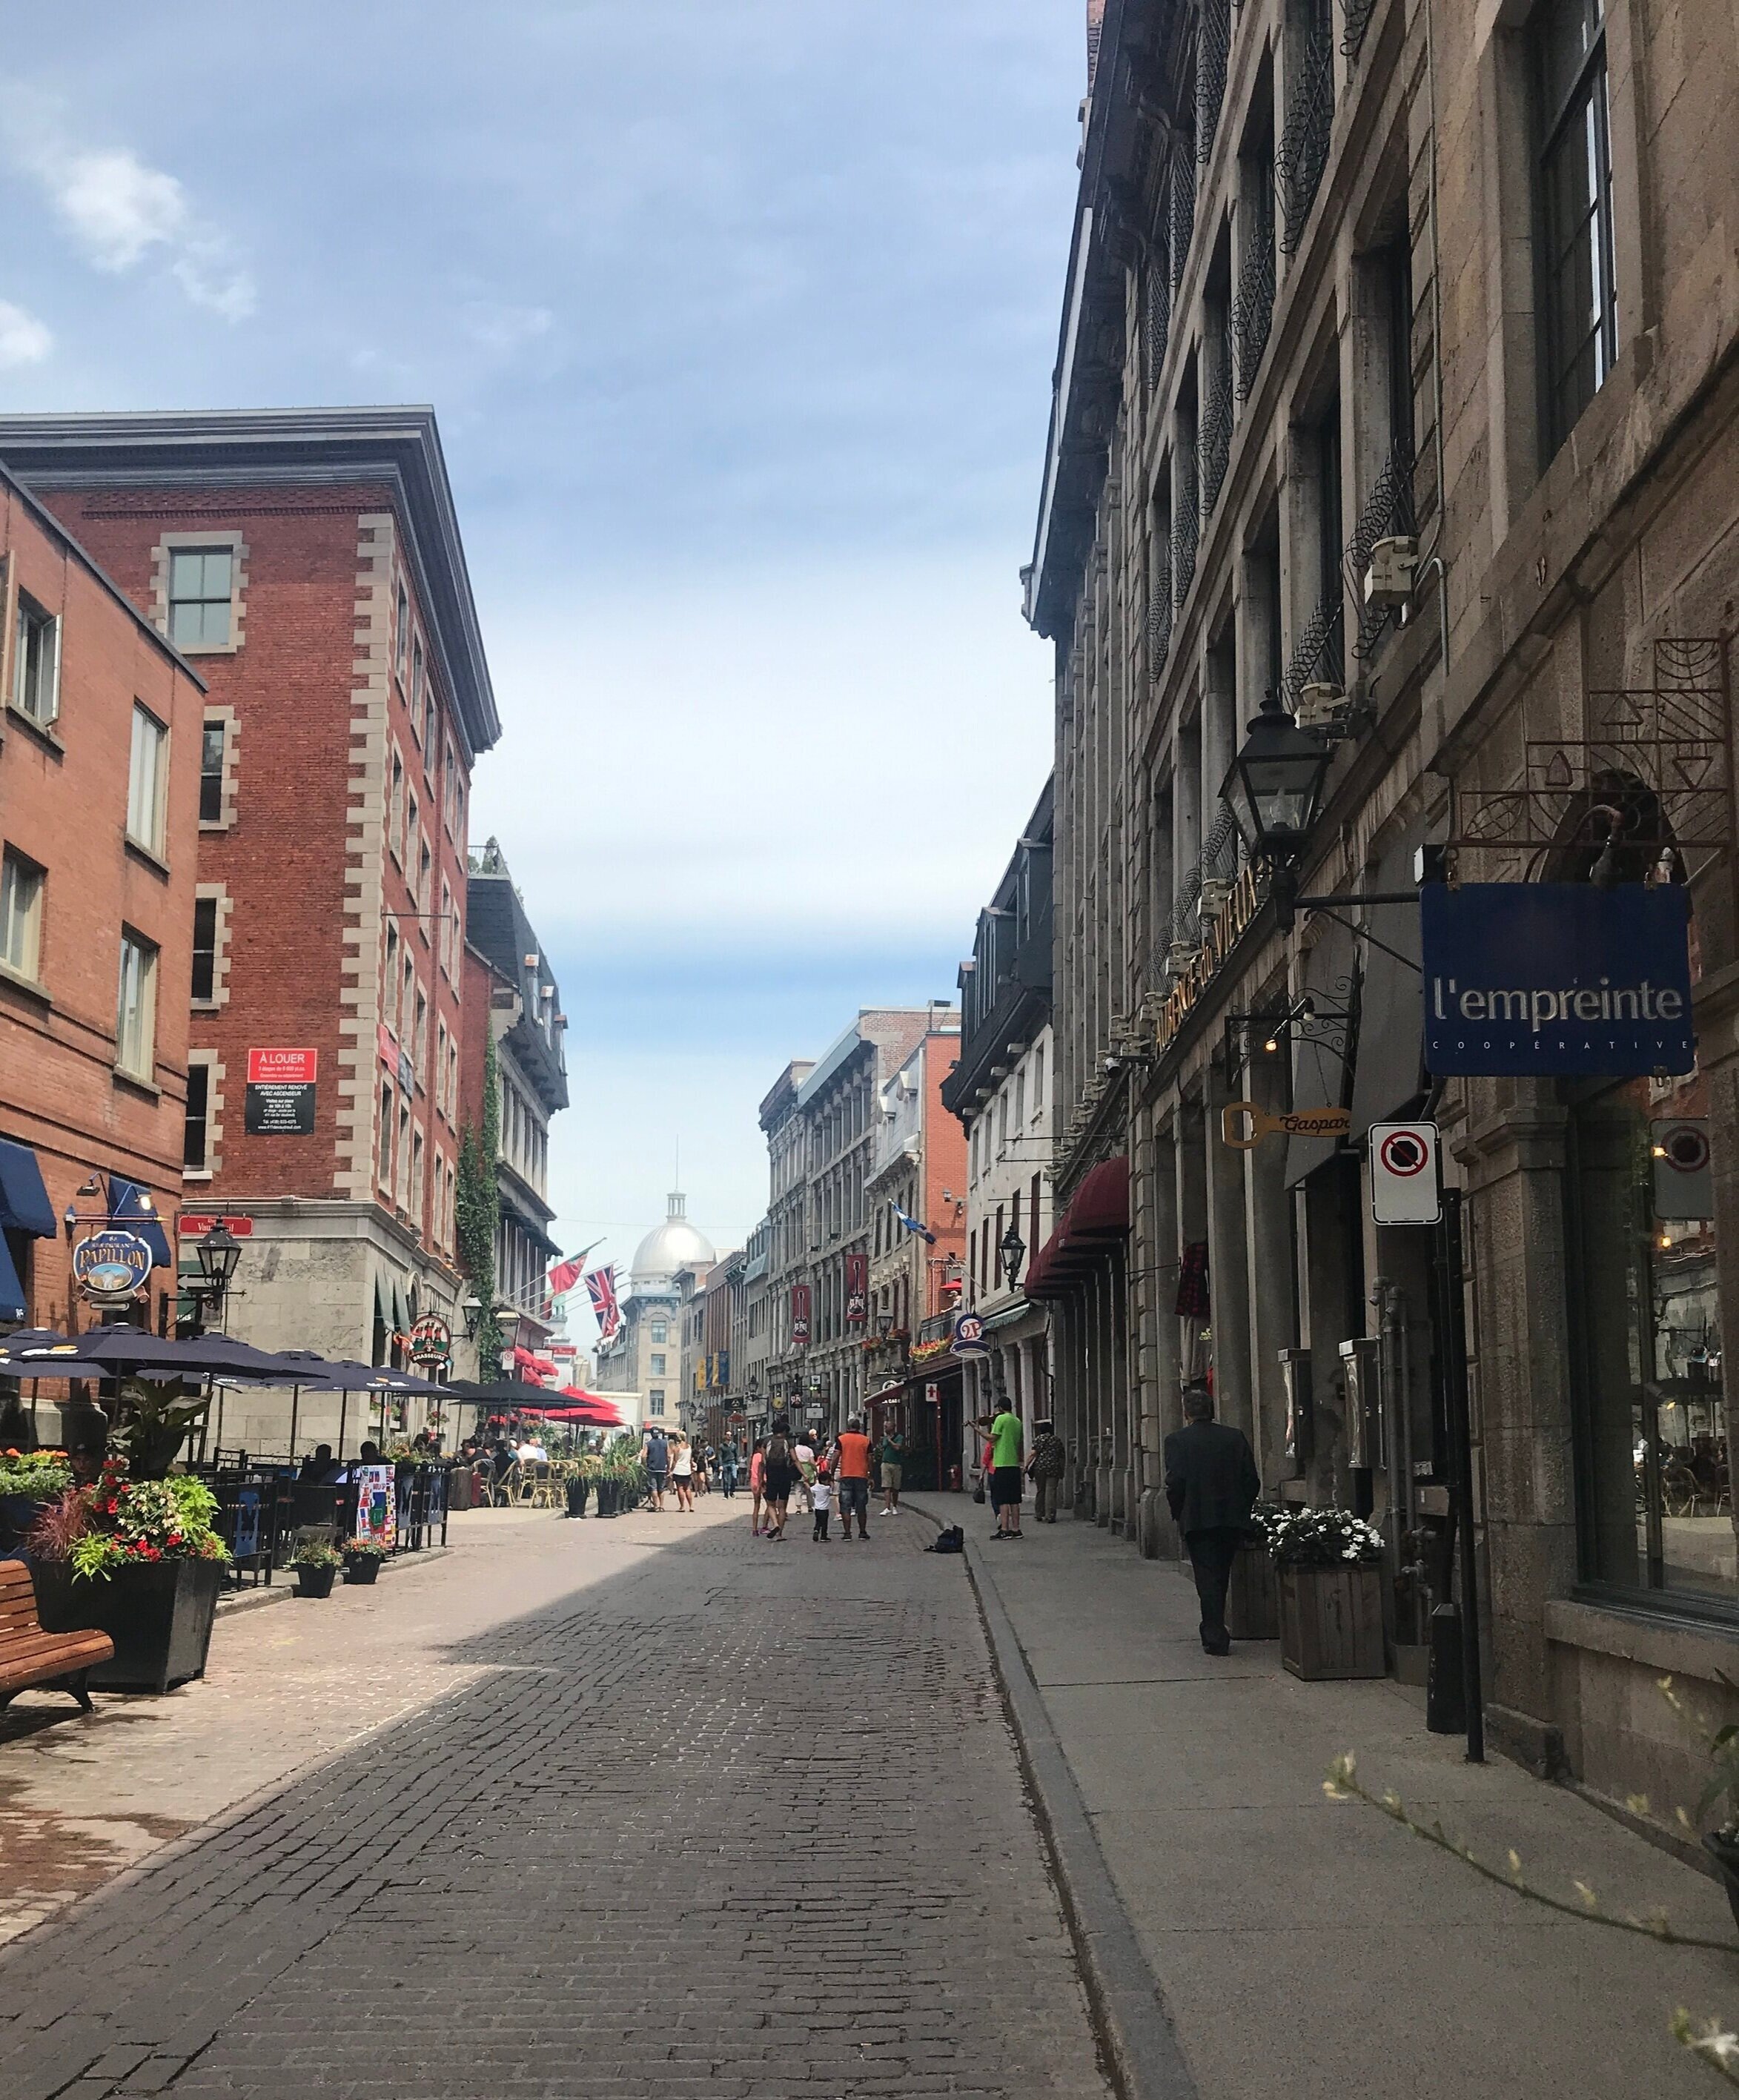 The historic french quarter of Montreal, Canada is my favorite part of this entire city!